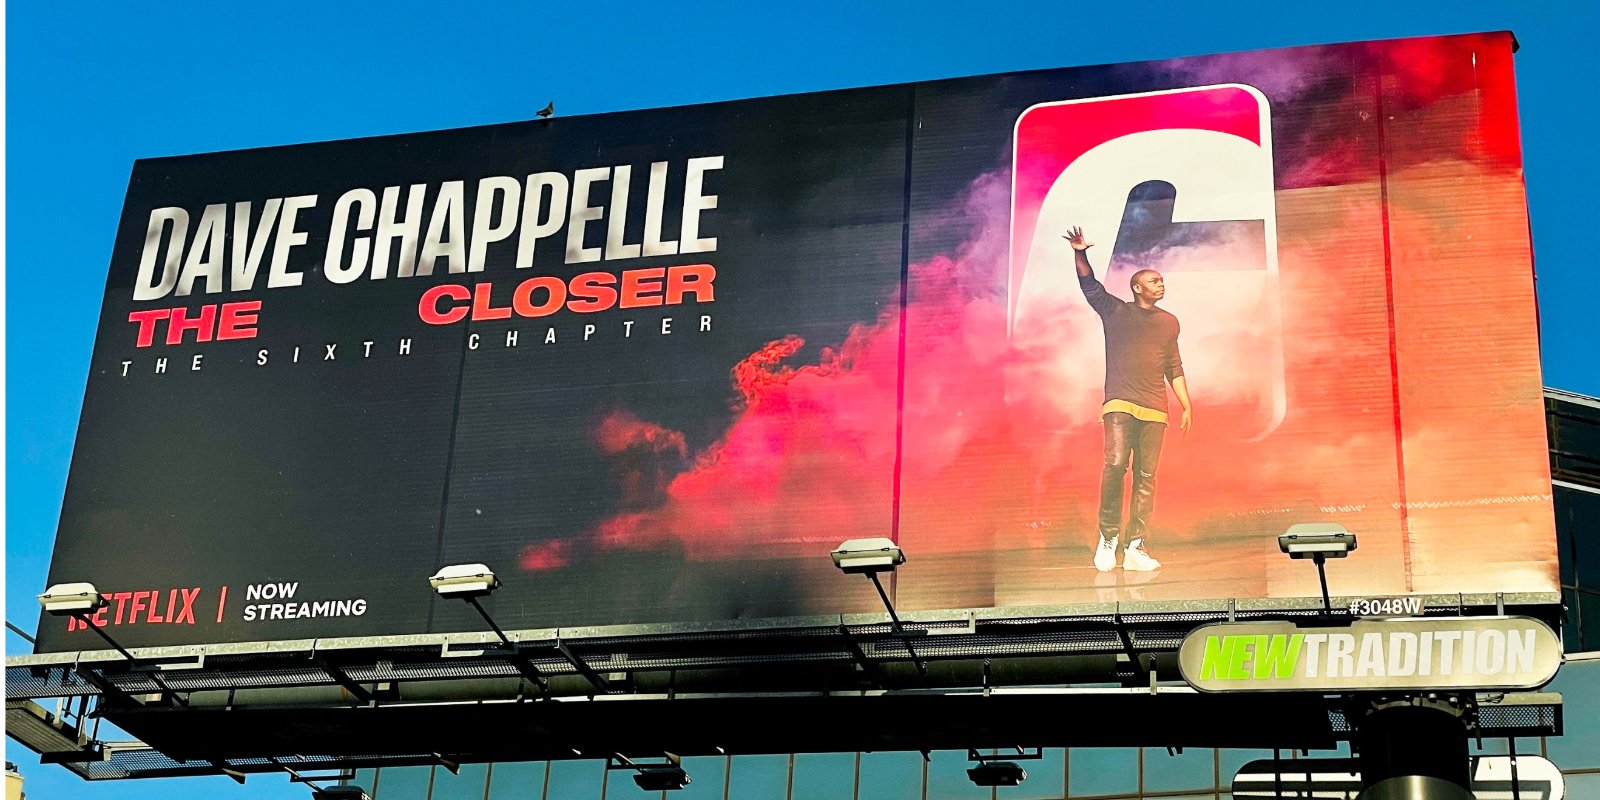 A billboard promotes Dave Chappelle's sixth Netflix comedy special, 'The Closer' in 2021.